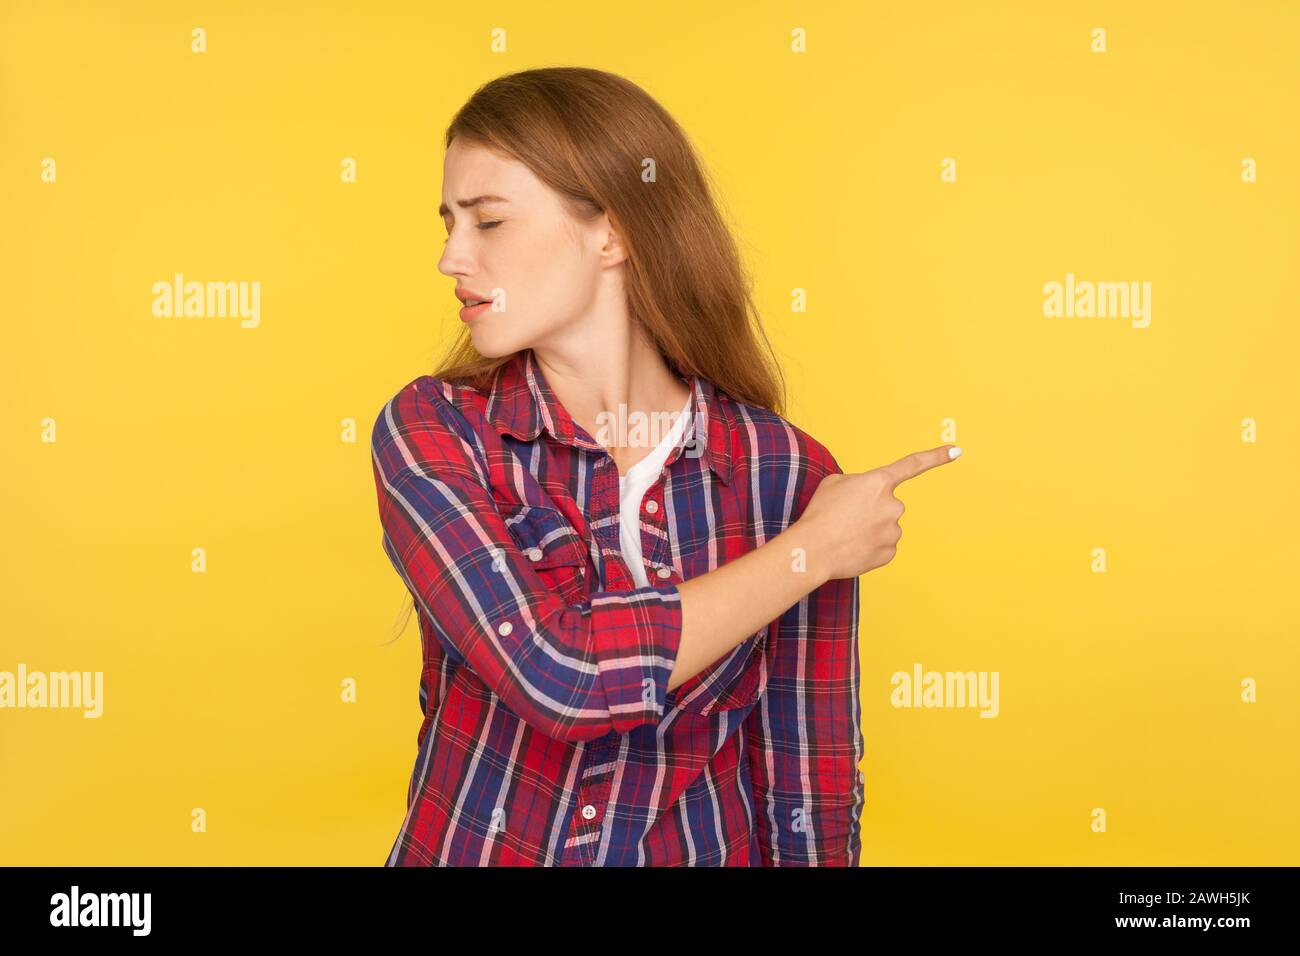 Conflict and breakup. Portrait of irritated ginger girl in checkered shirt turning away and showing gesture get out, asking to leave, feeling betrayed Stock Photo